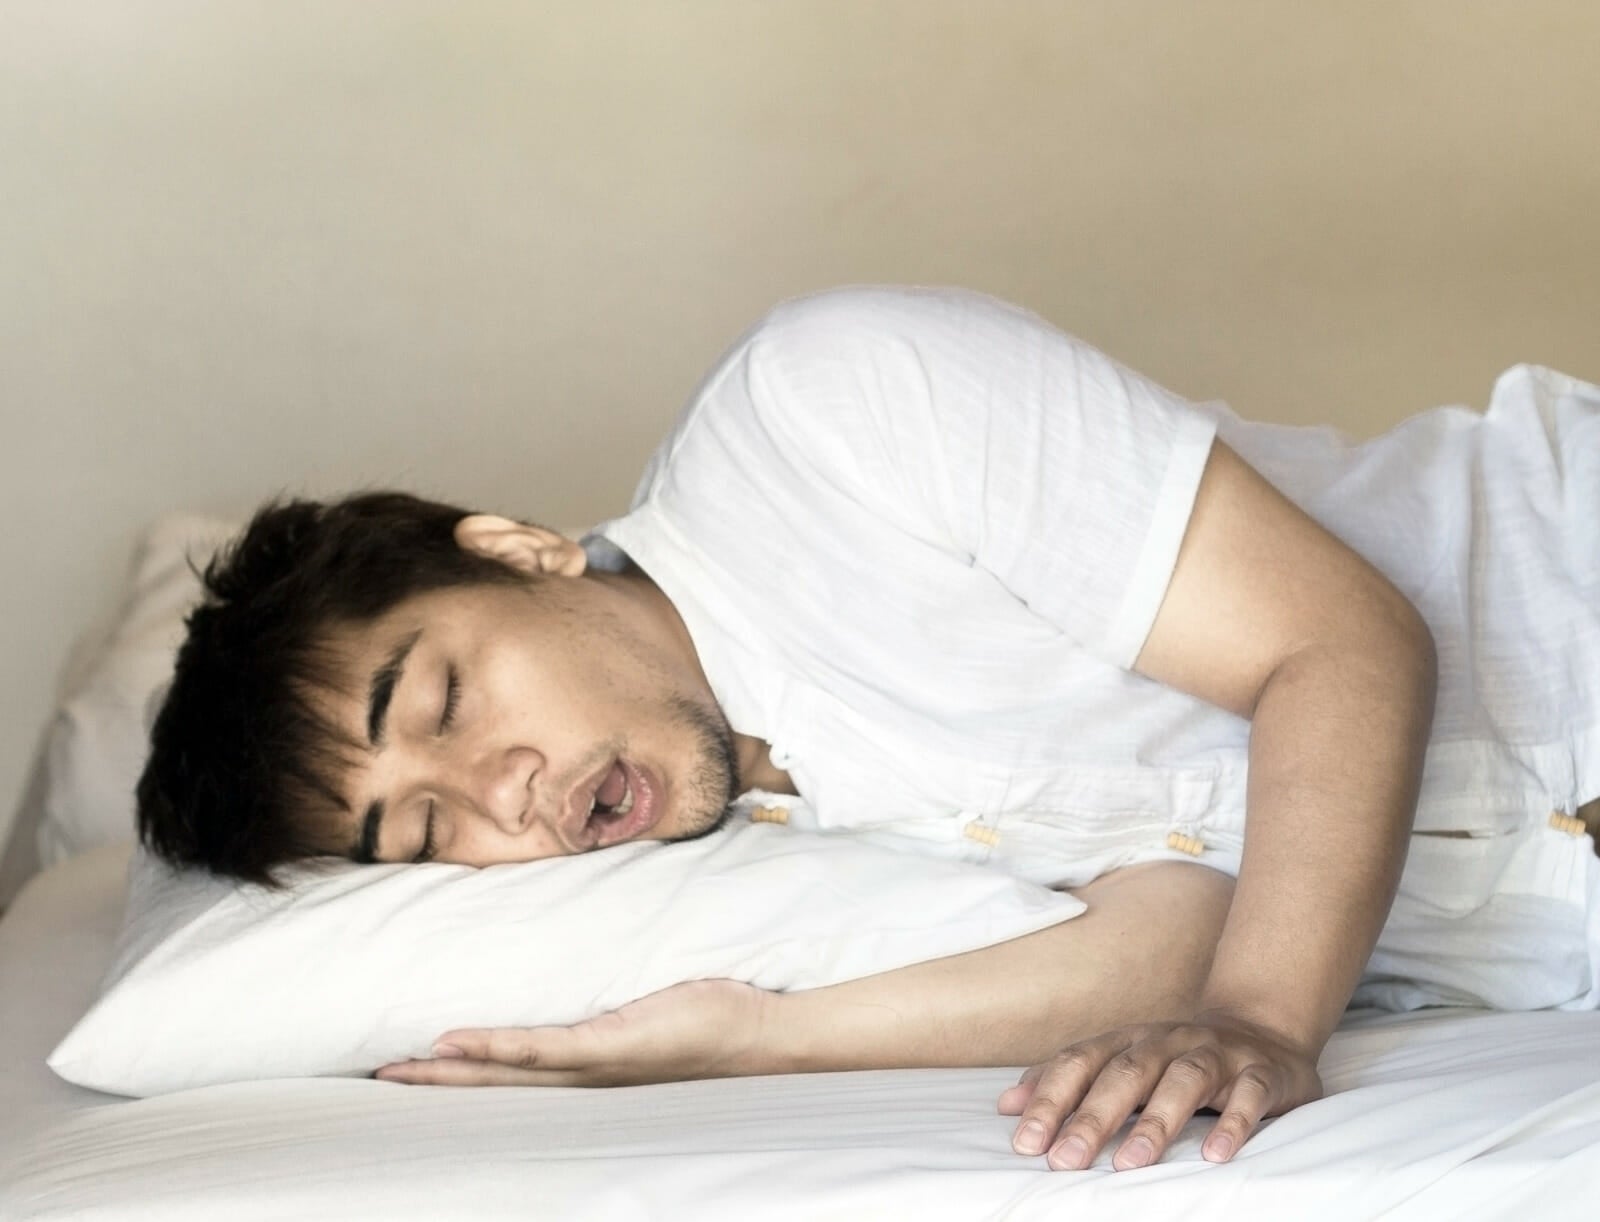 123rf man sleeping with mouth open